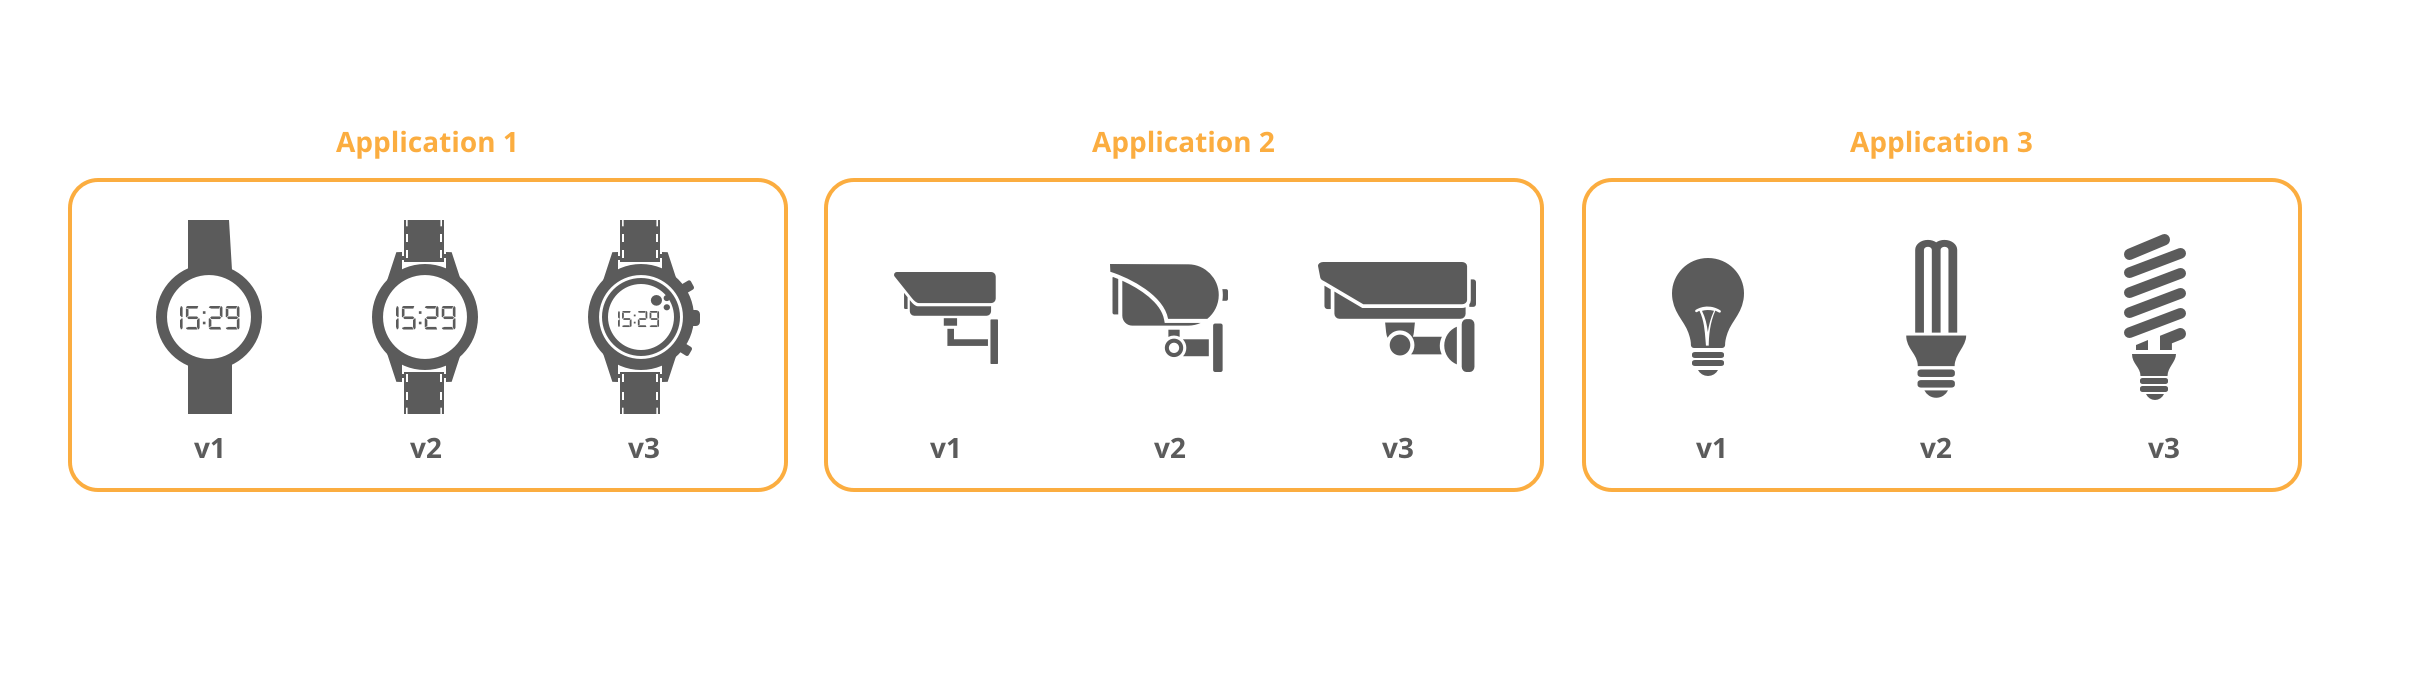 Diagram showing different application and application versions